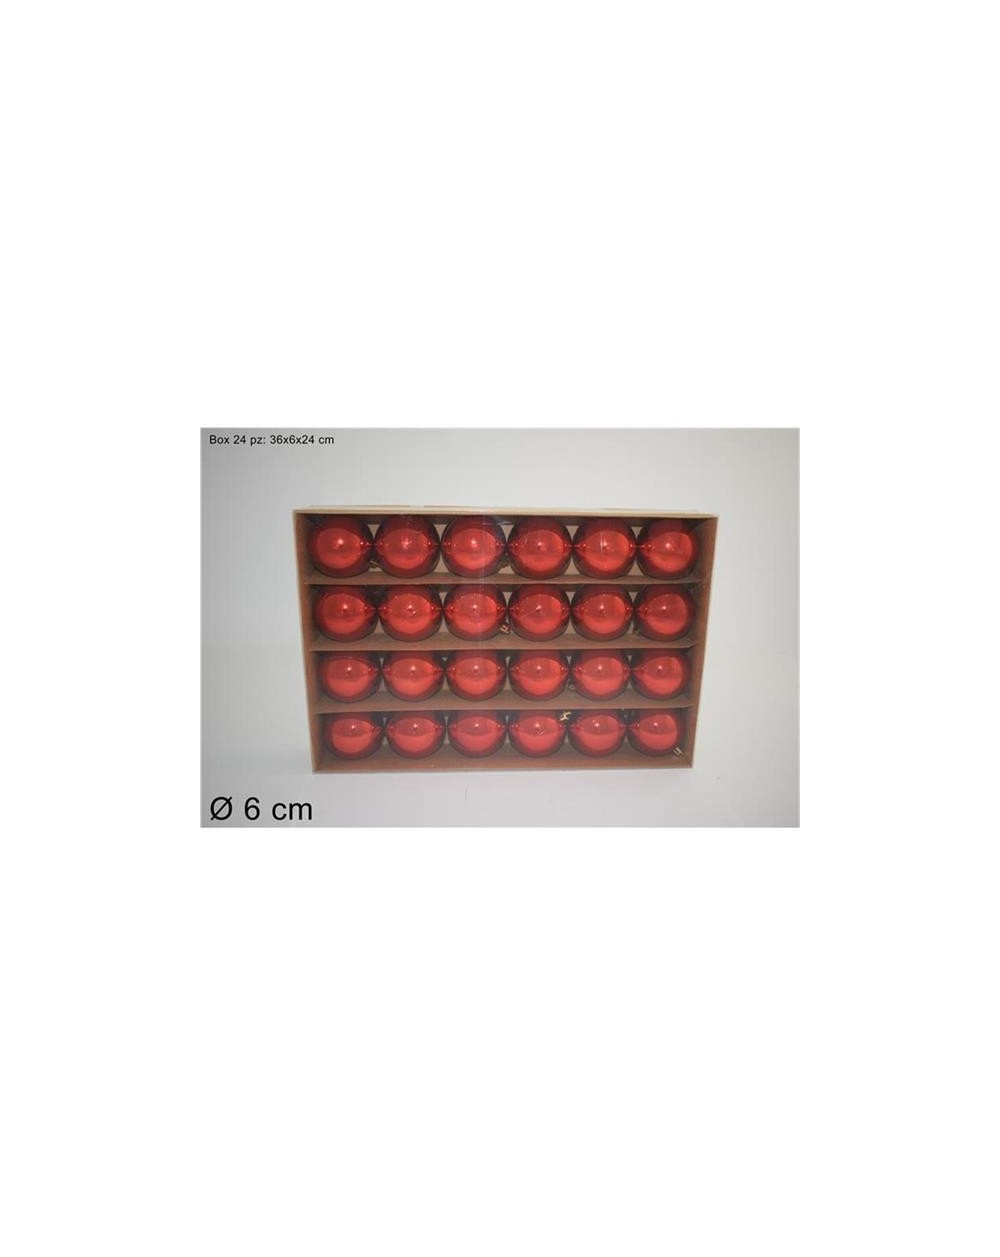 BOX 24 PALLE 6cm.LUCIDE ROSSO  A209185